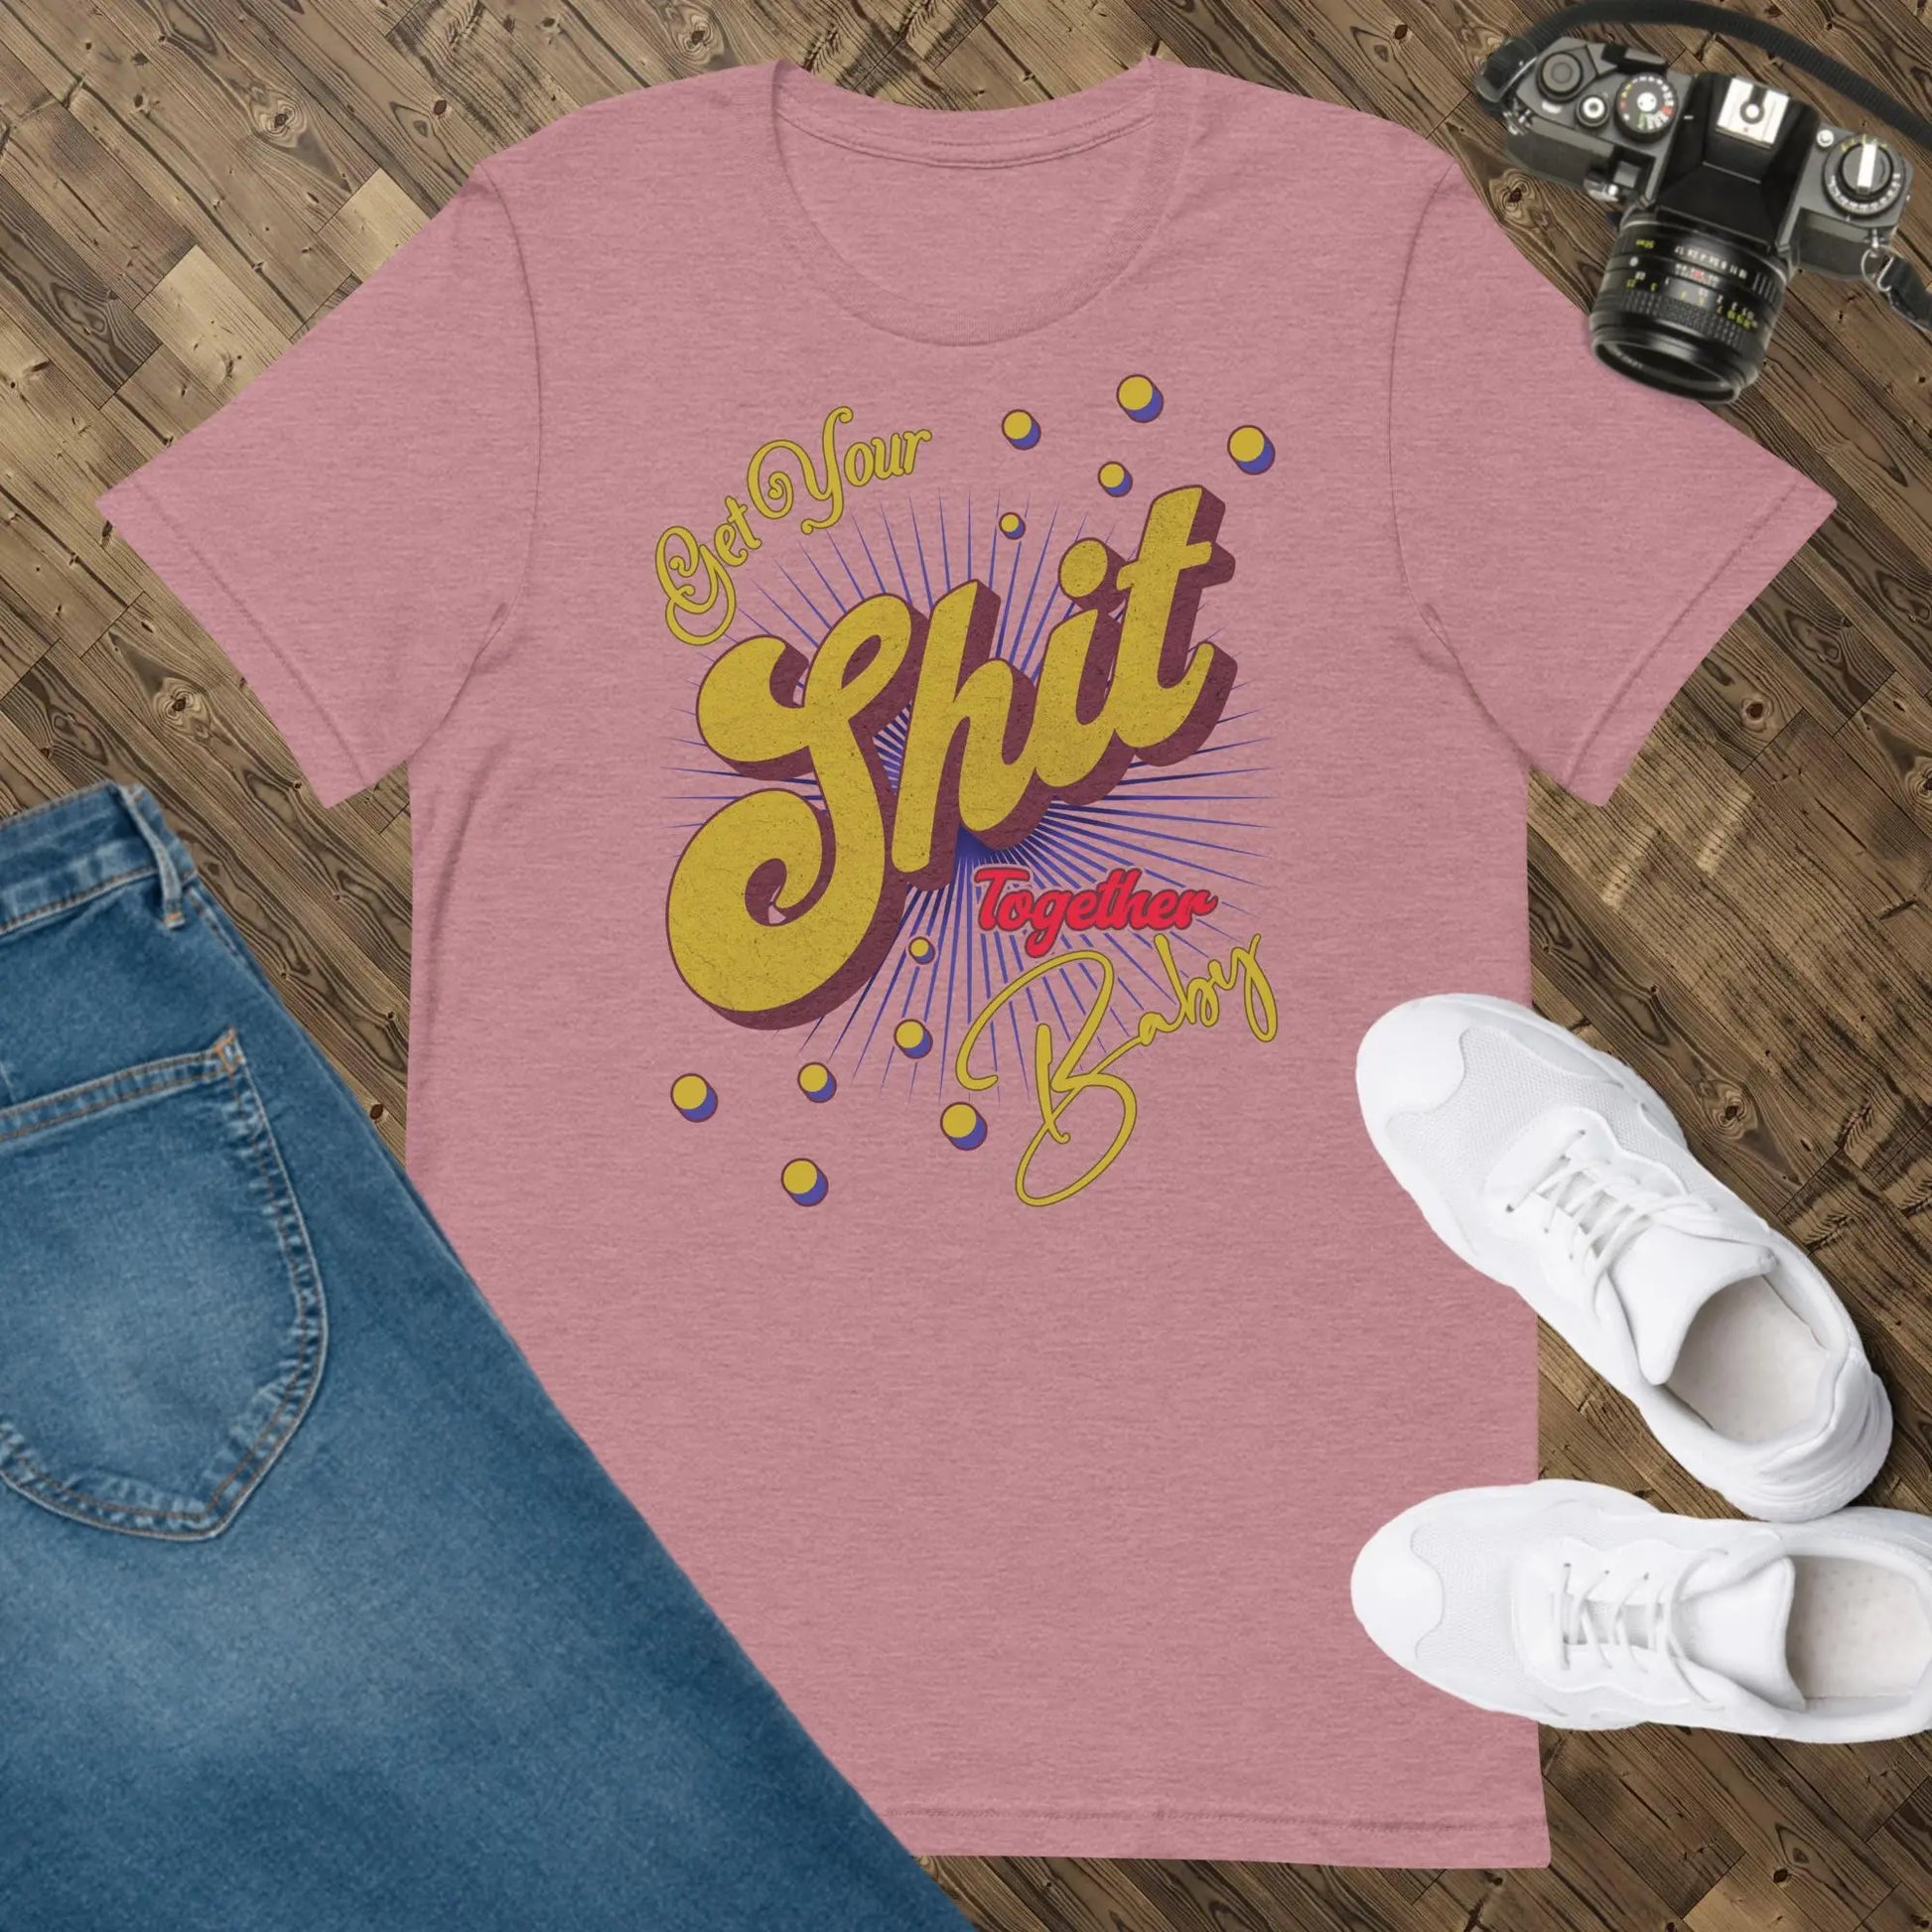 Get Your Shit Together Unisex t-shirt by BC Ink Works - BC Ink Works